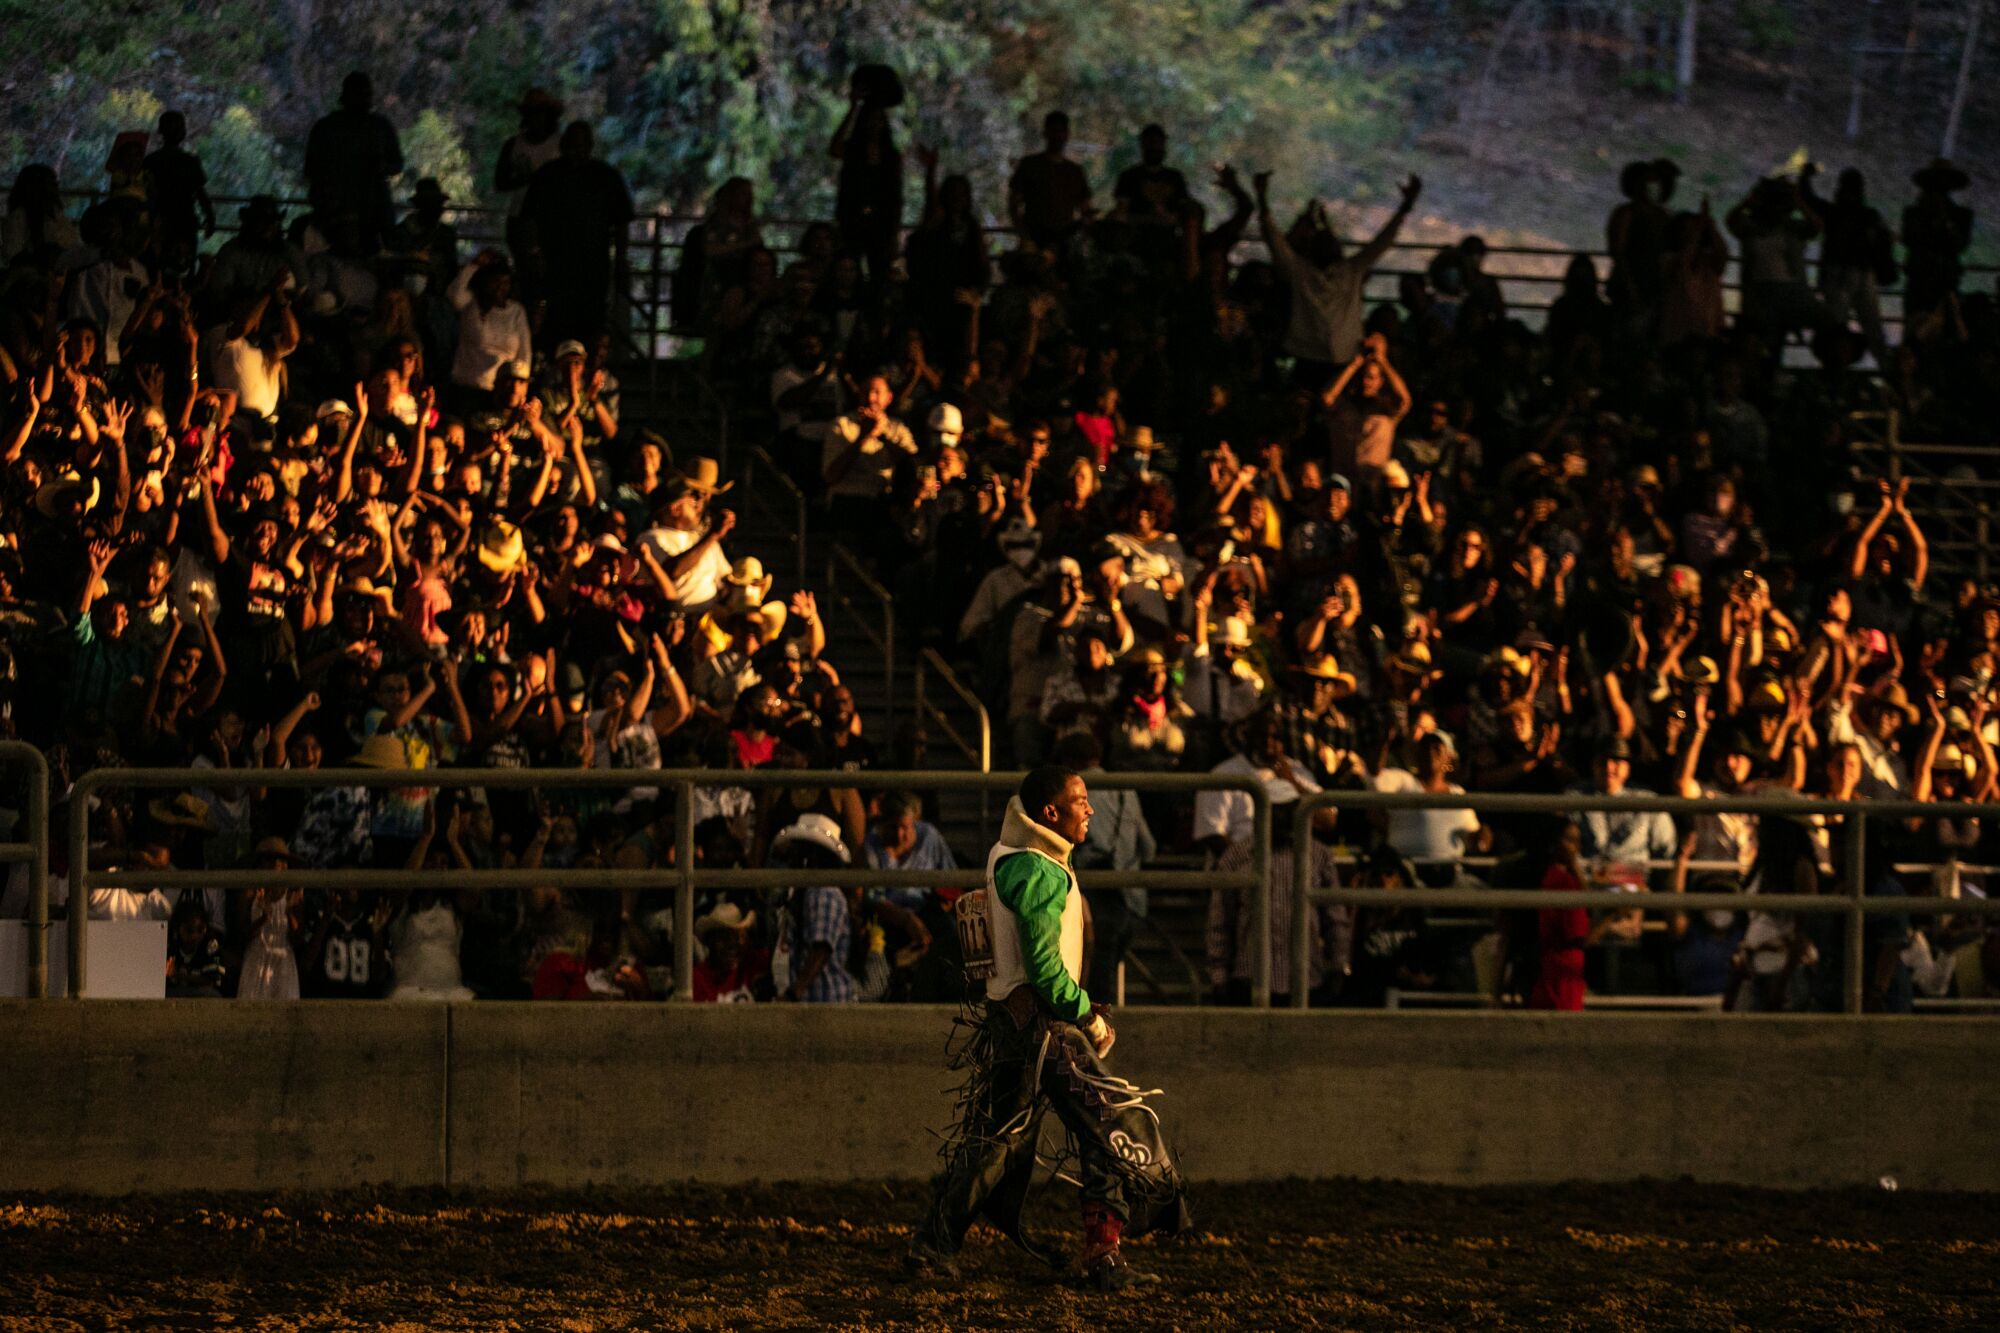 A crowd cheering from the stands as a man carrying a saddle walks through a rodeo arena